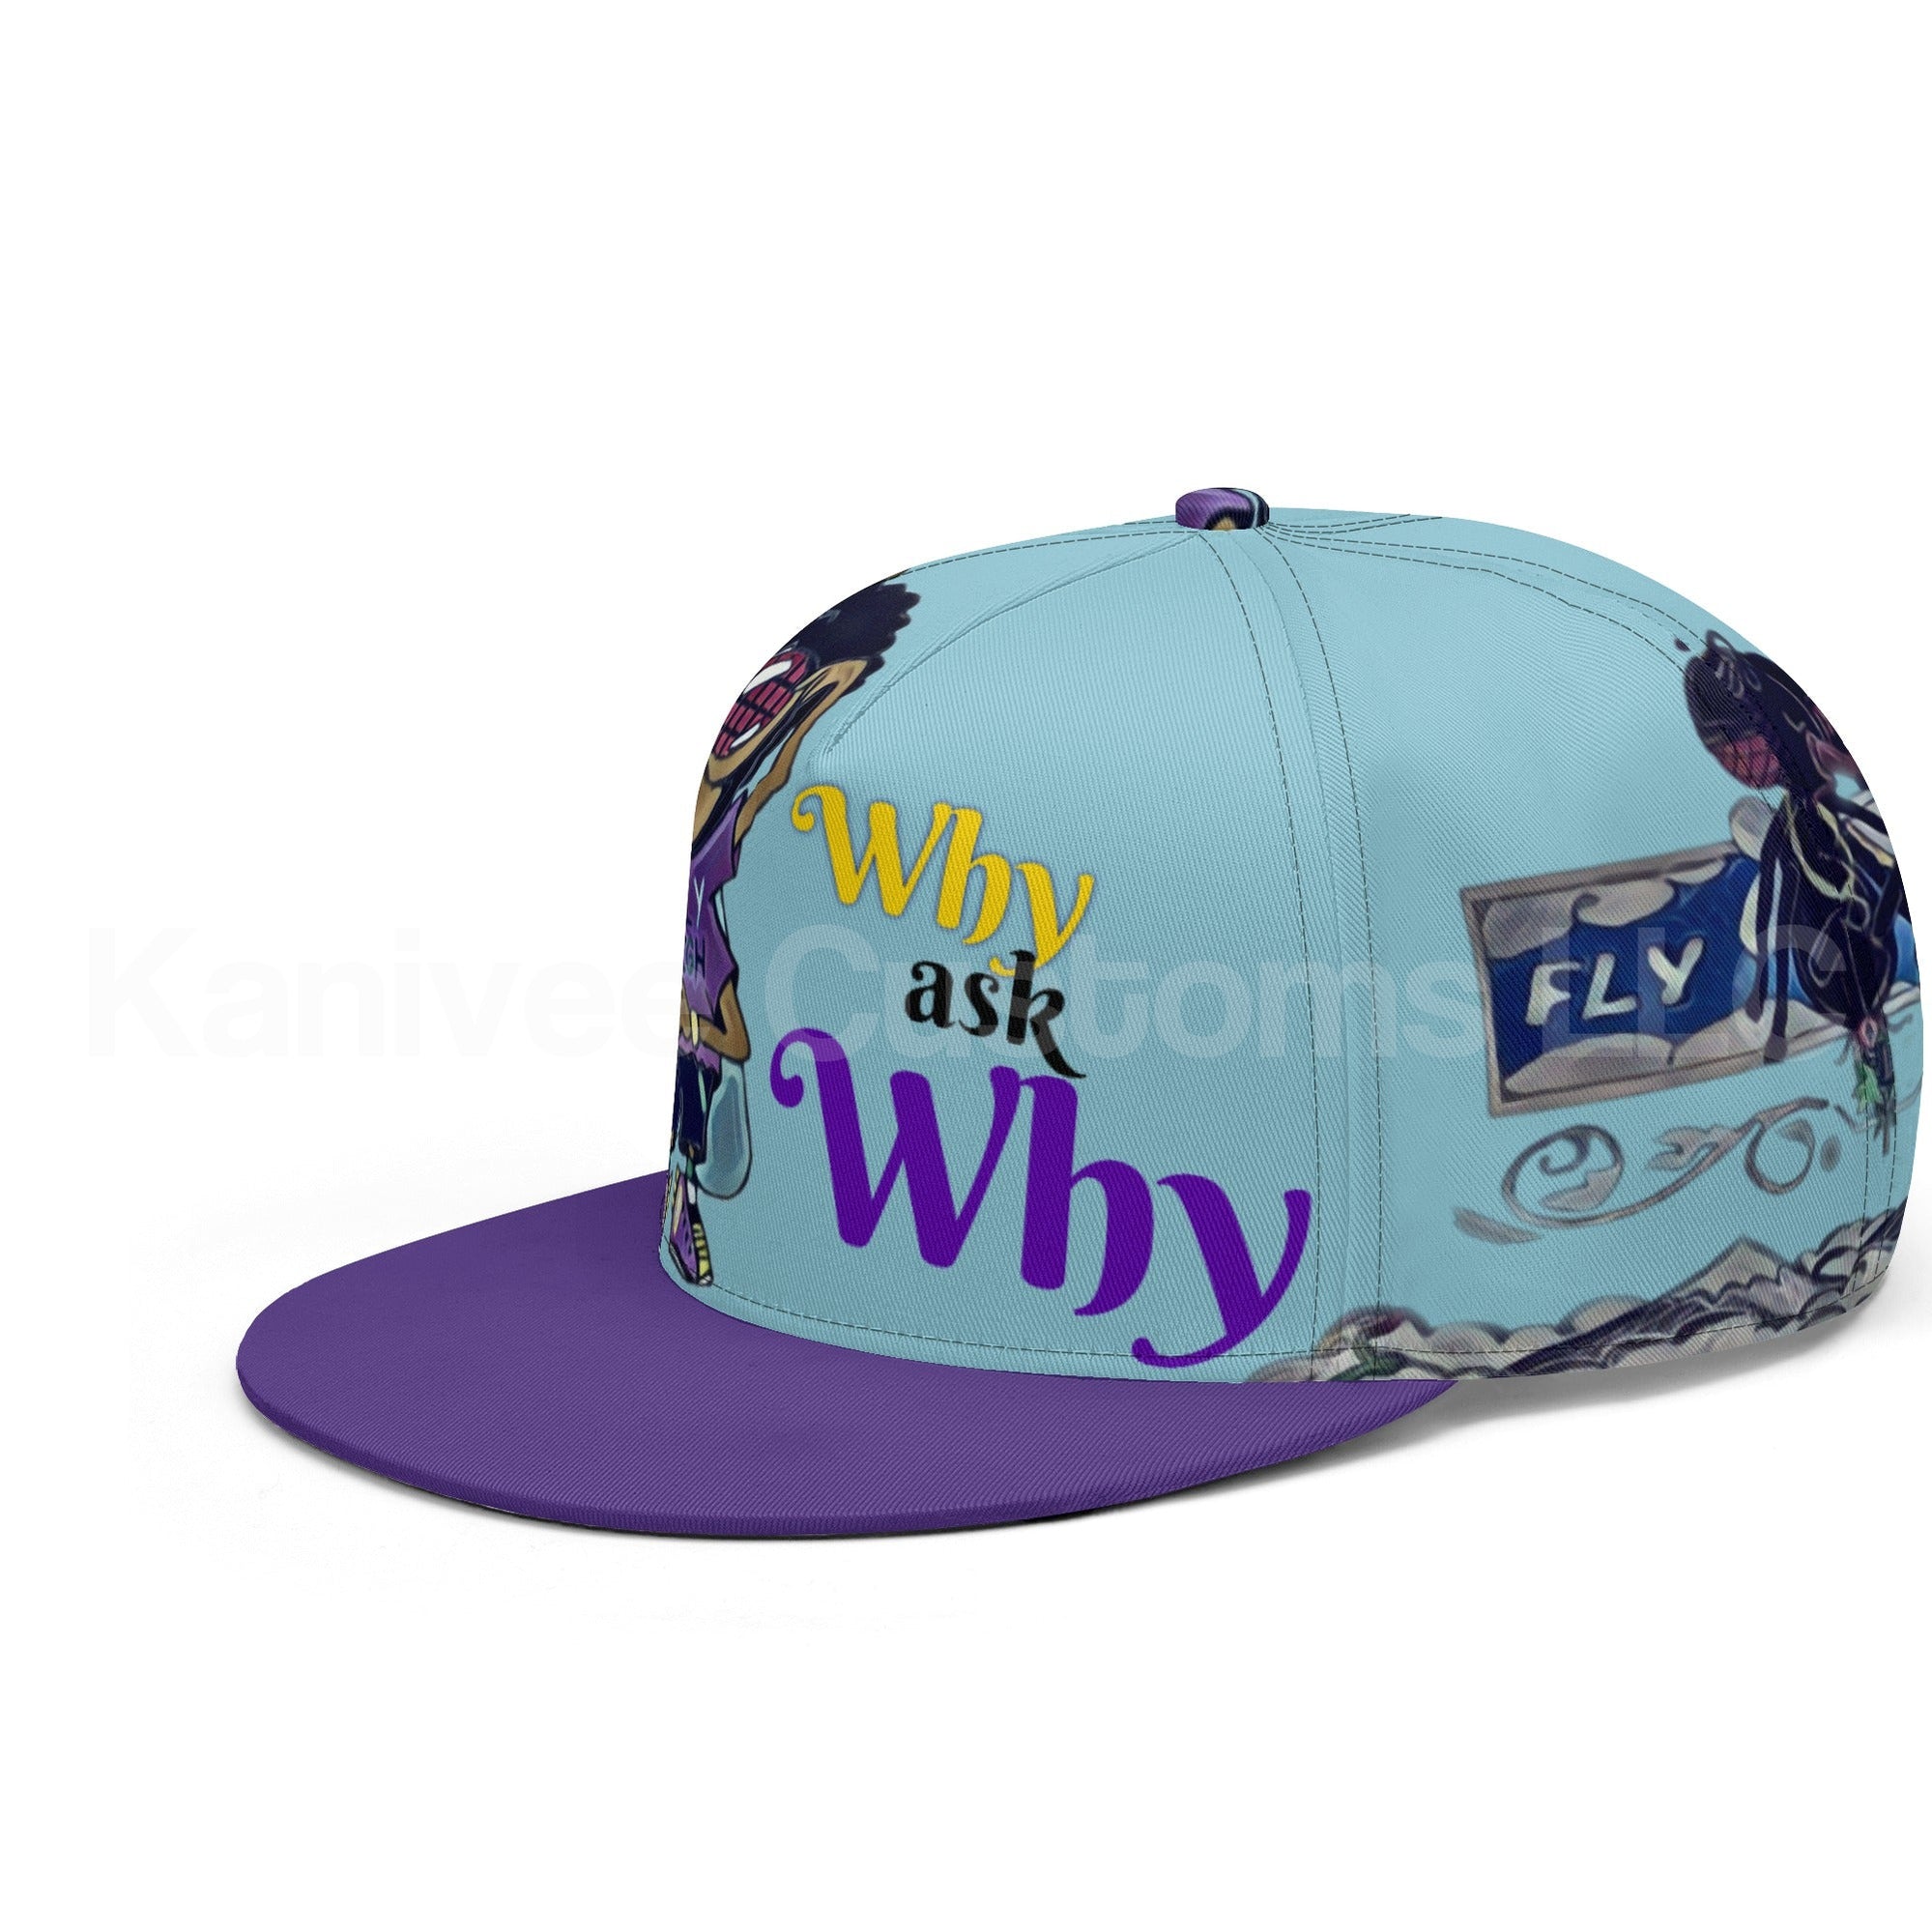 FlyHigh Why Ask Why kNOwCap - Kanivee Customs